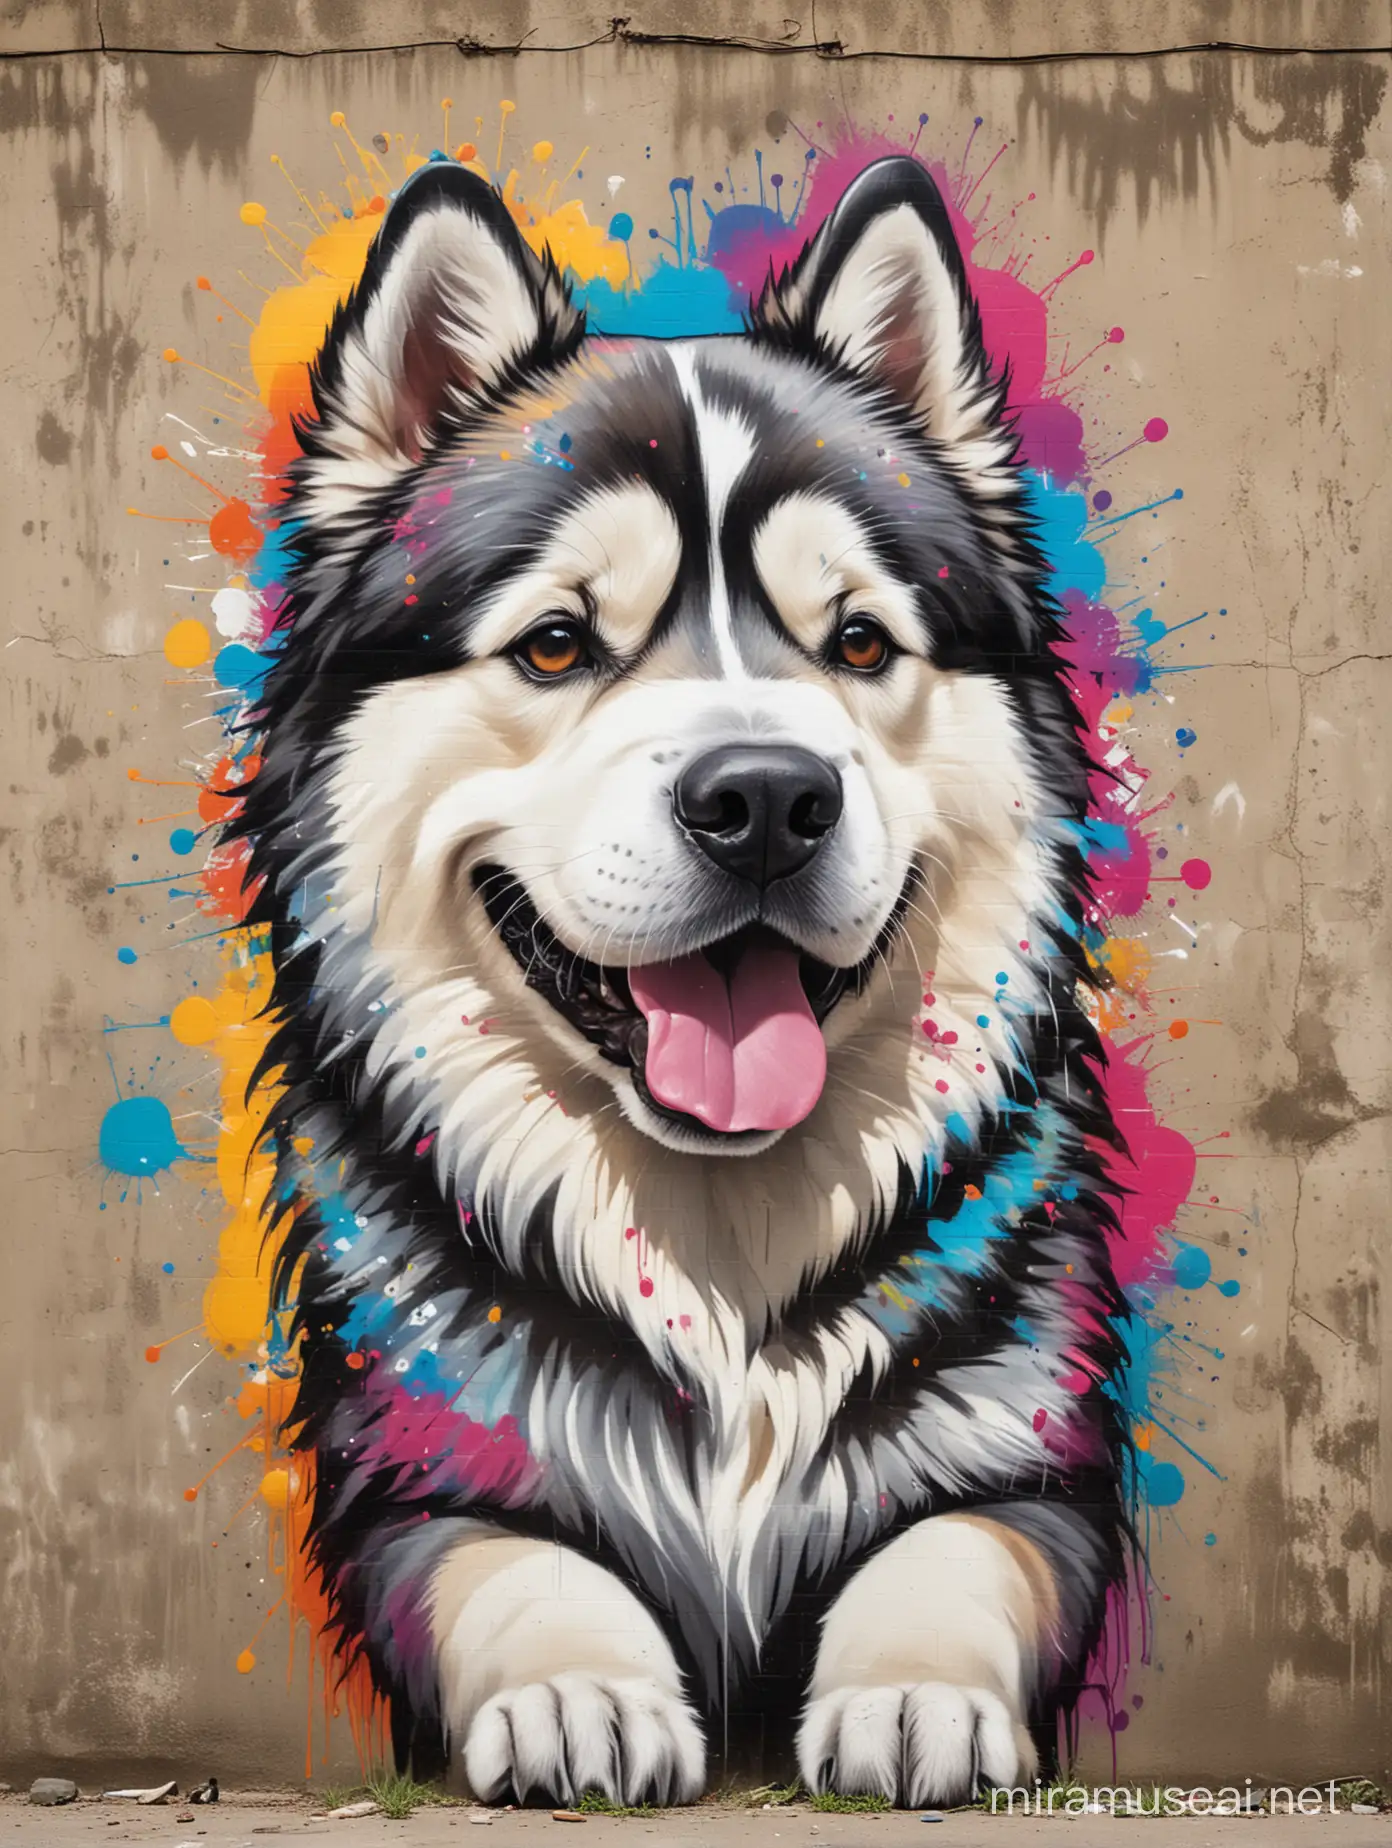 art movement focused on emotional impact through free-flowing shapes and colors, often without depicting real objects,
Create a graffiti of a tiny happy Alaskan Malamute dog on the foreground, colorful graffiti art, on a wall, rustic background, graffiti art style